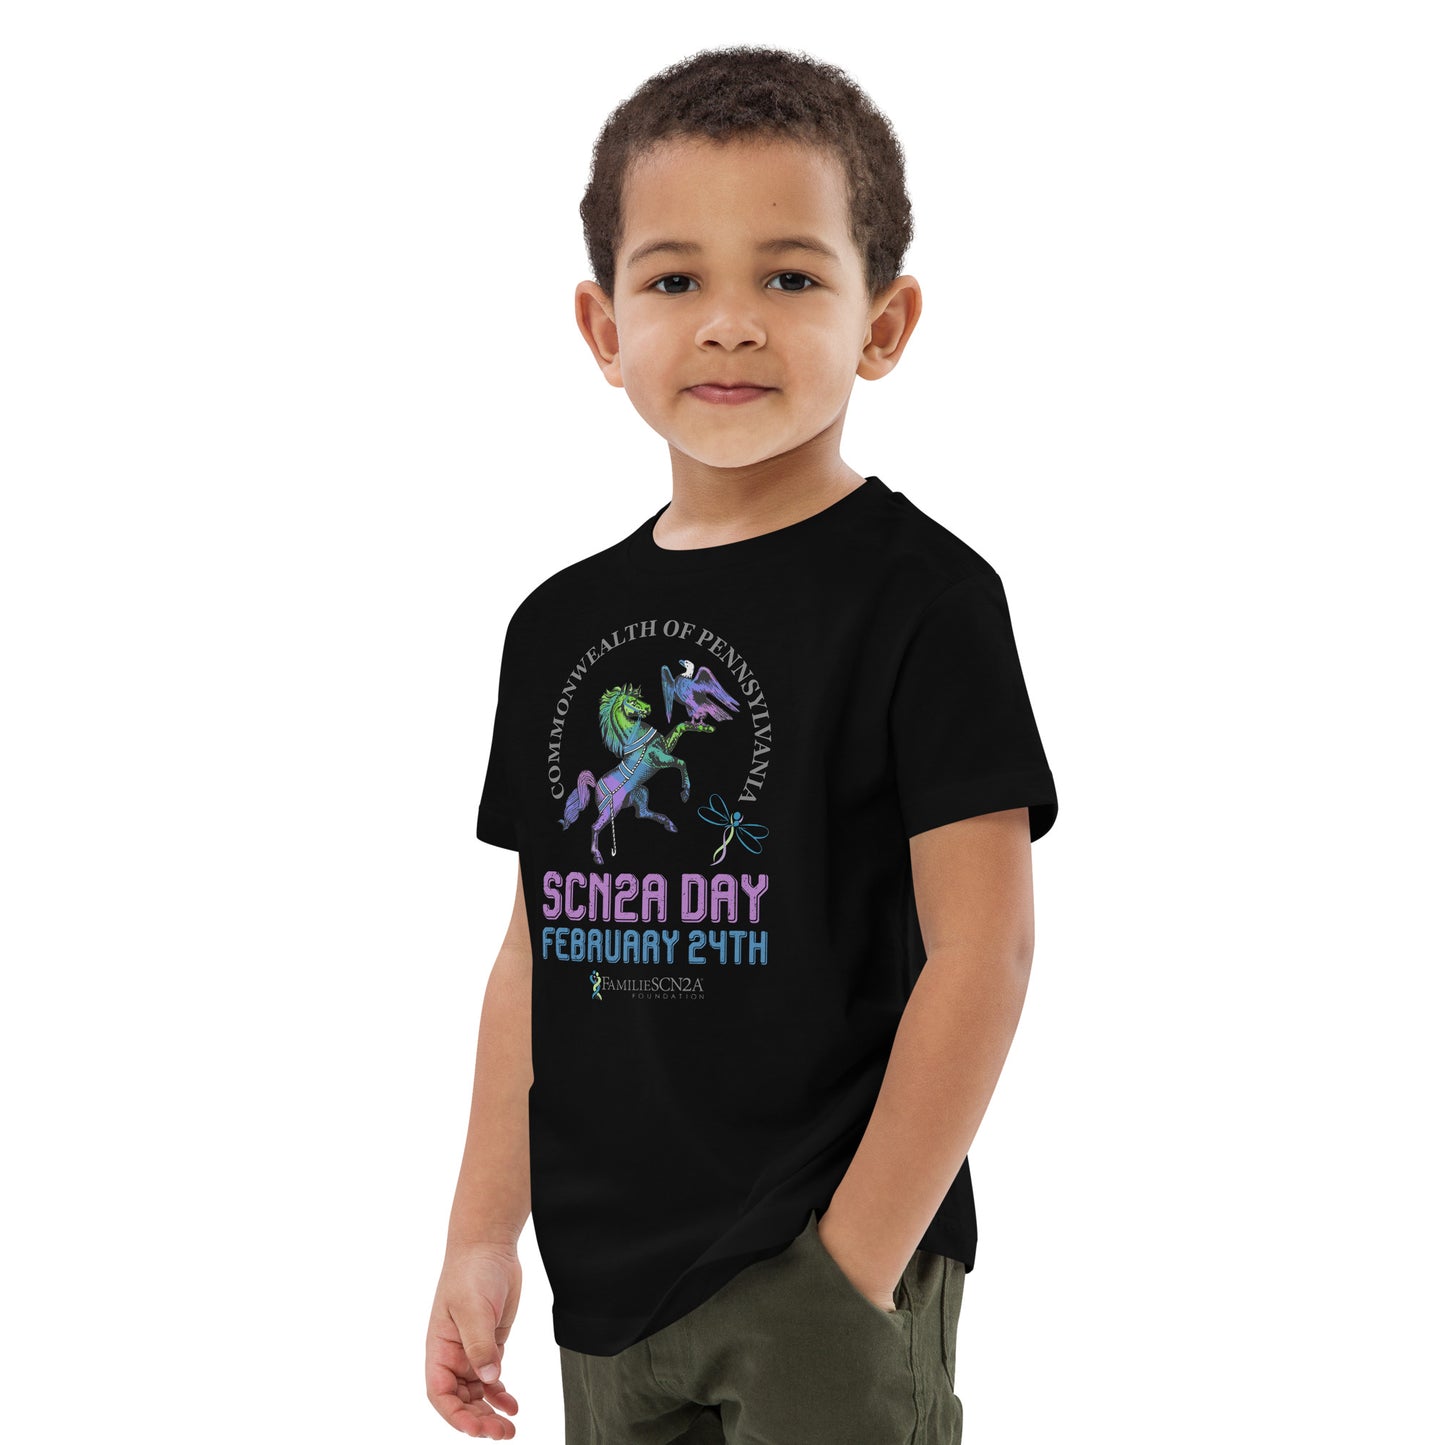 Youth - Pennsylvania SCN2A Day State Shirt